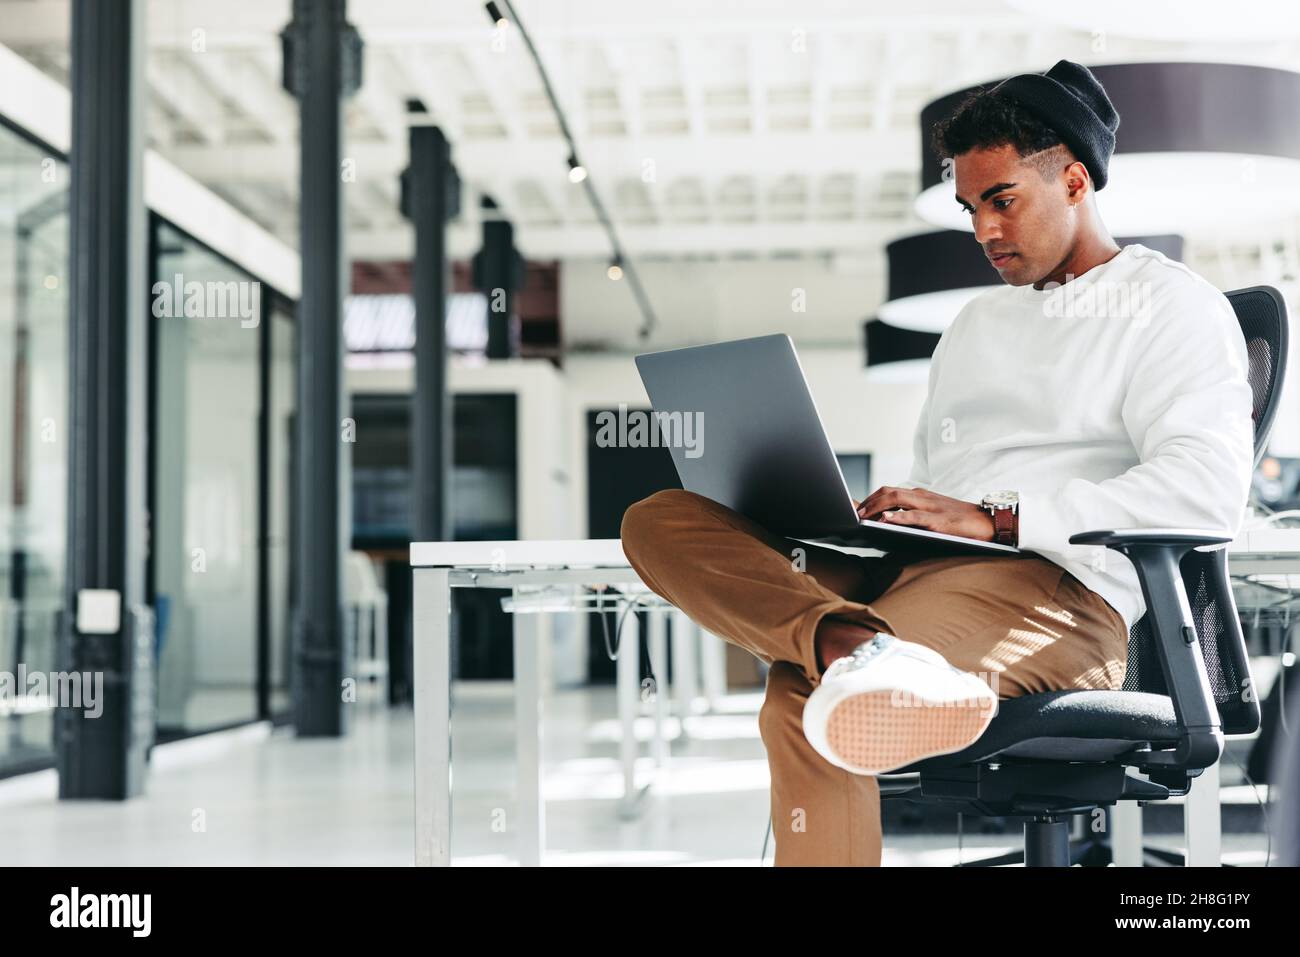 Focused software developer working on a new project. Young businessman using a laptop while sitting in a modern workplace. Creative businessman workin Stock Photo